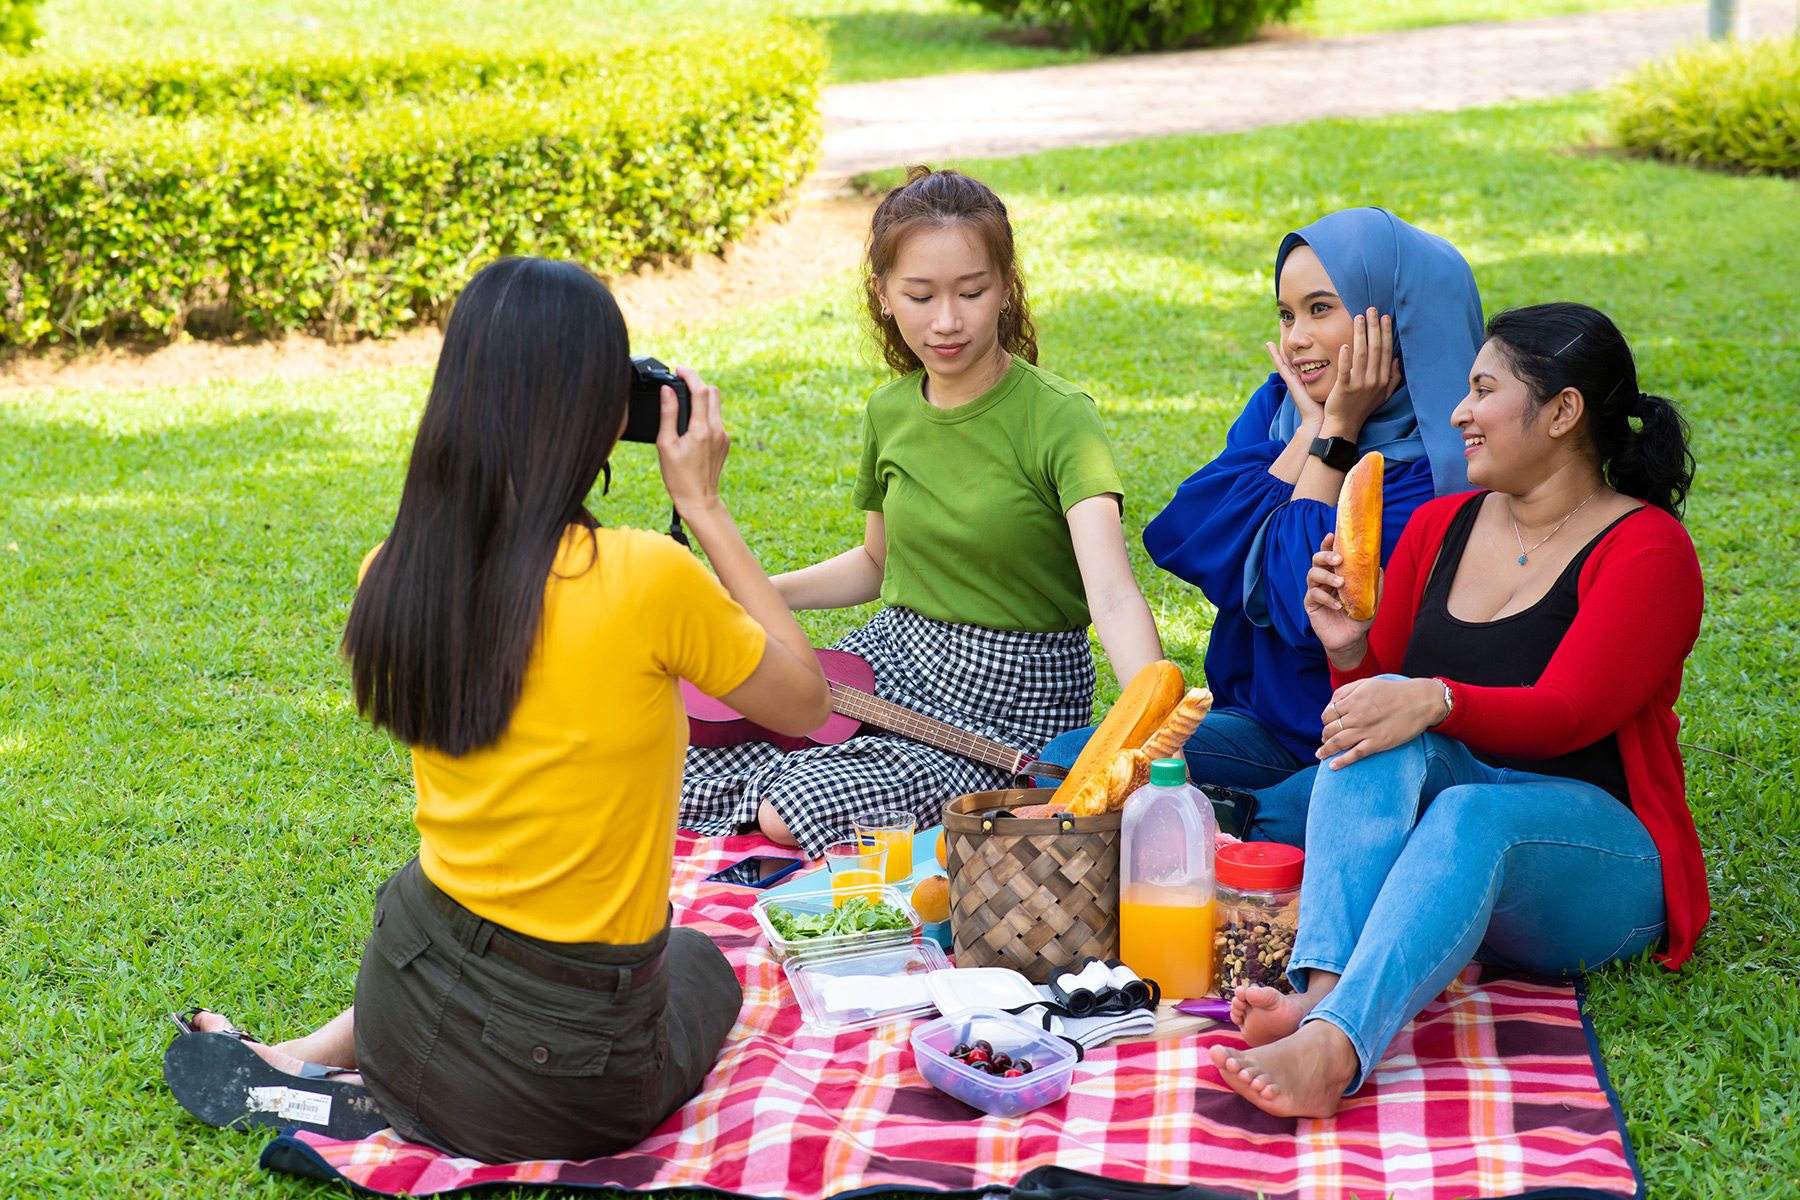 Women having a picnic in a park. One is posing for a picture, the others are focussed on the bread.